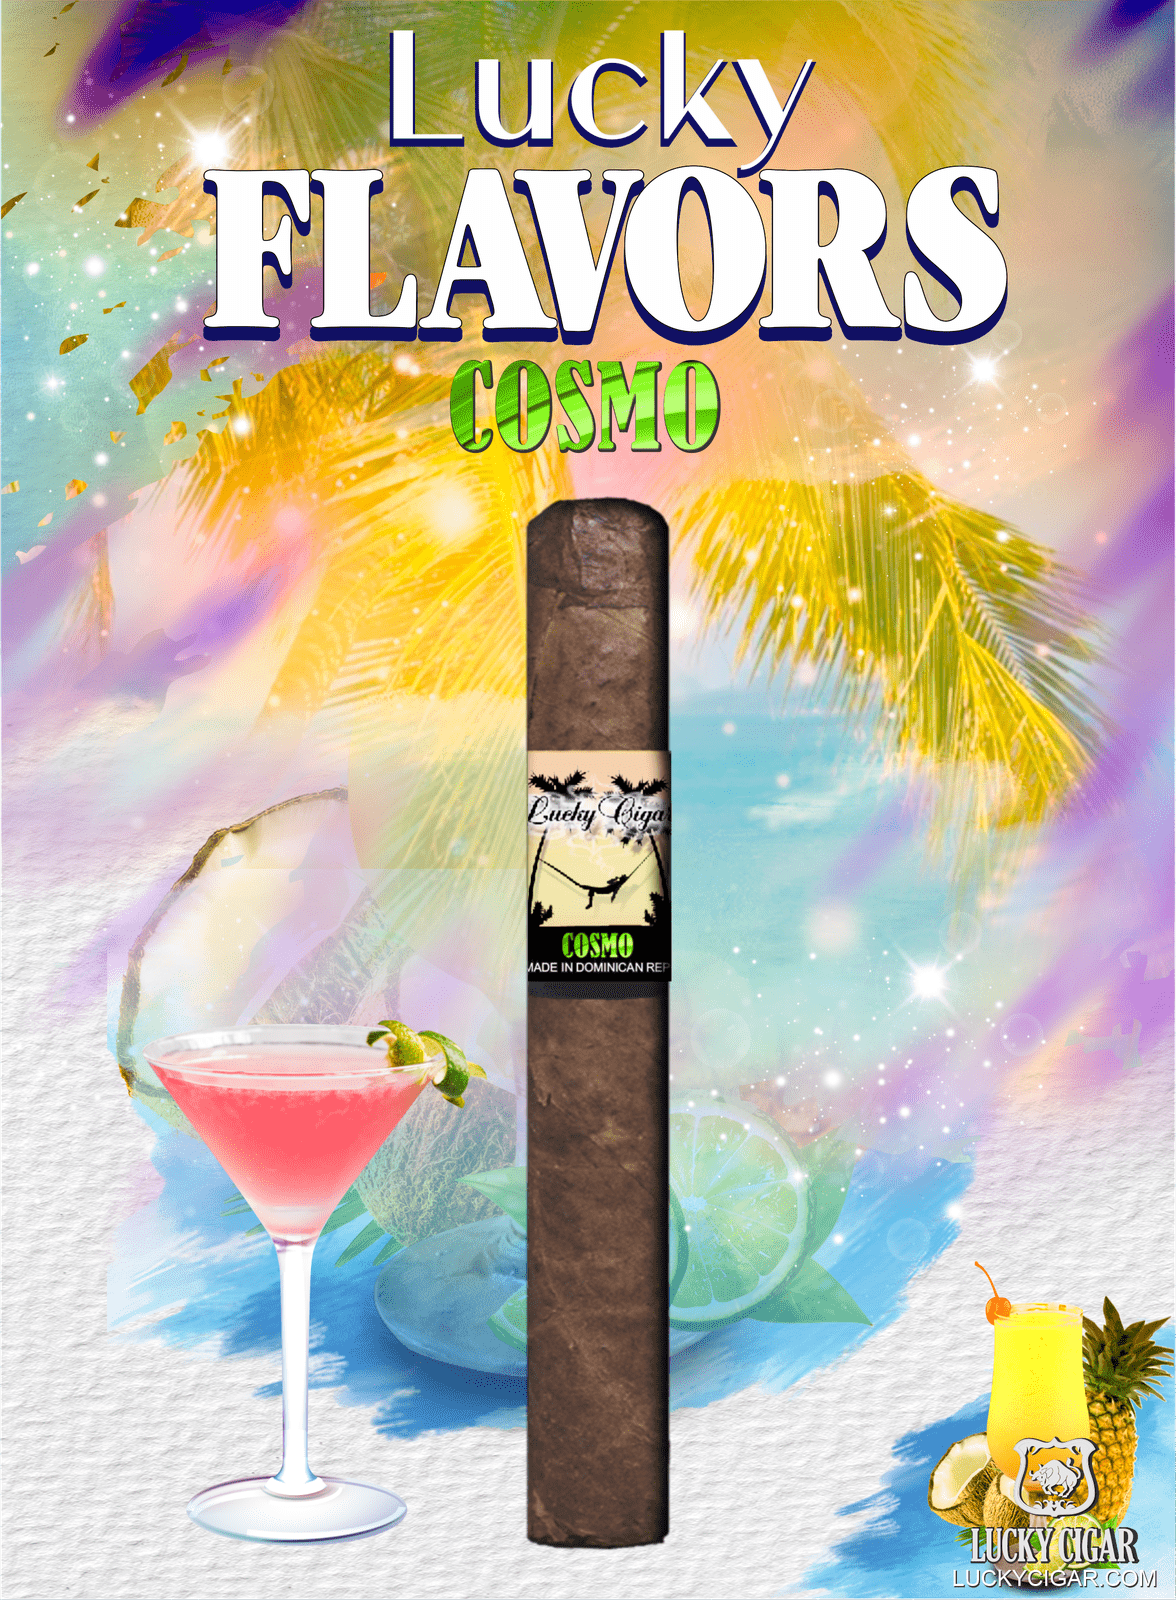 Flavored Cigars: Lucky Flavors Cosmo 5x42 Cigar